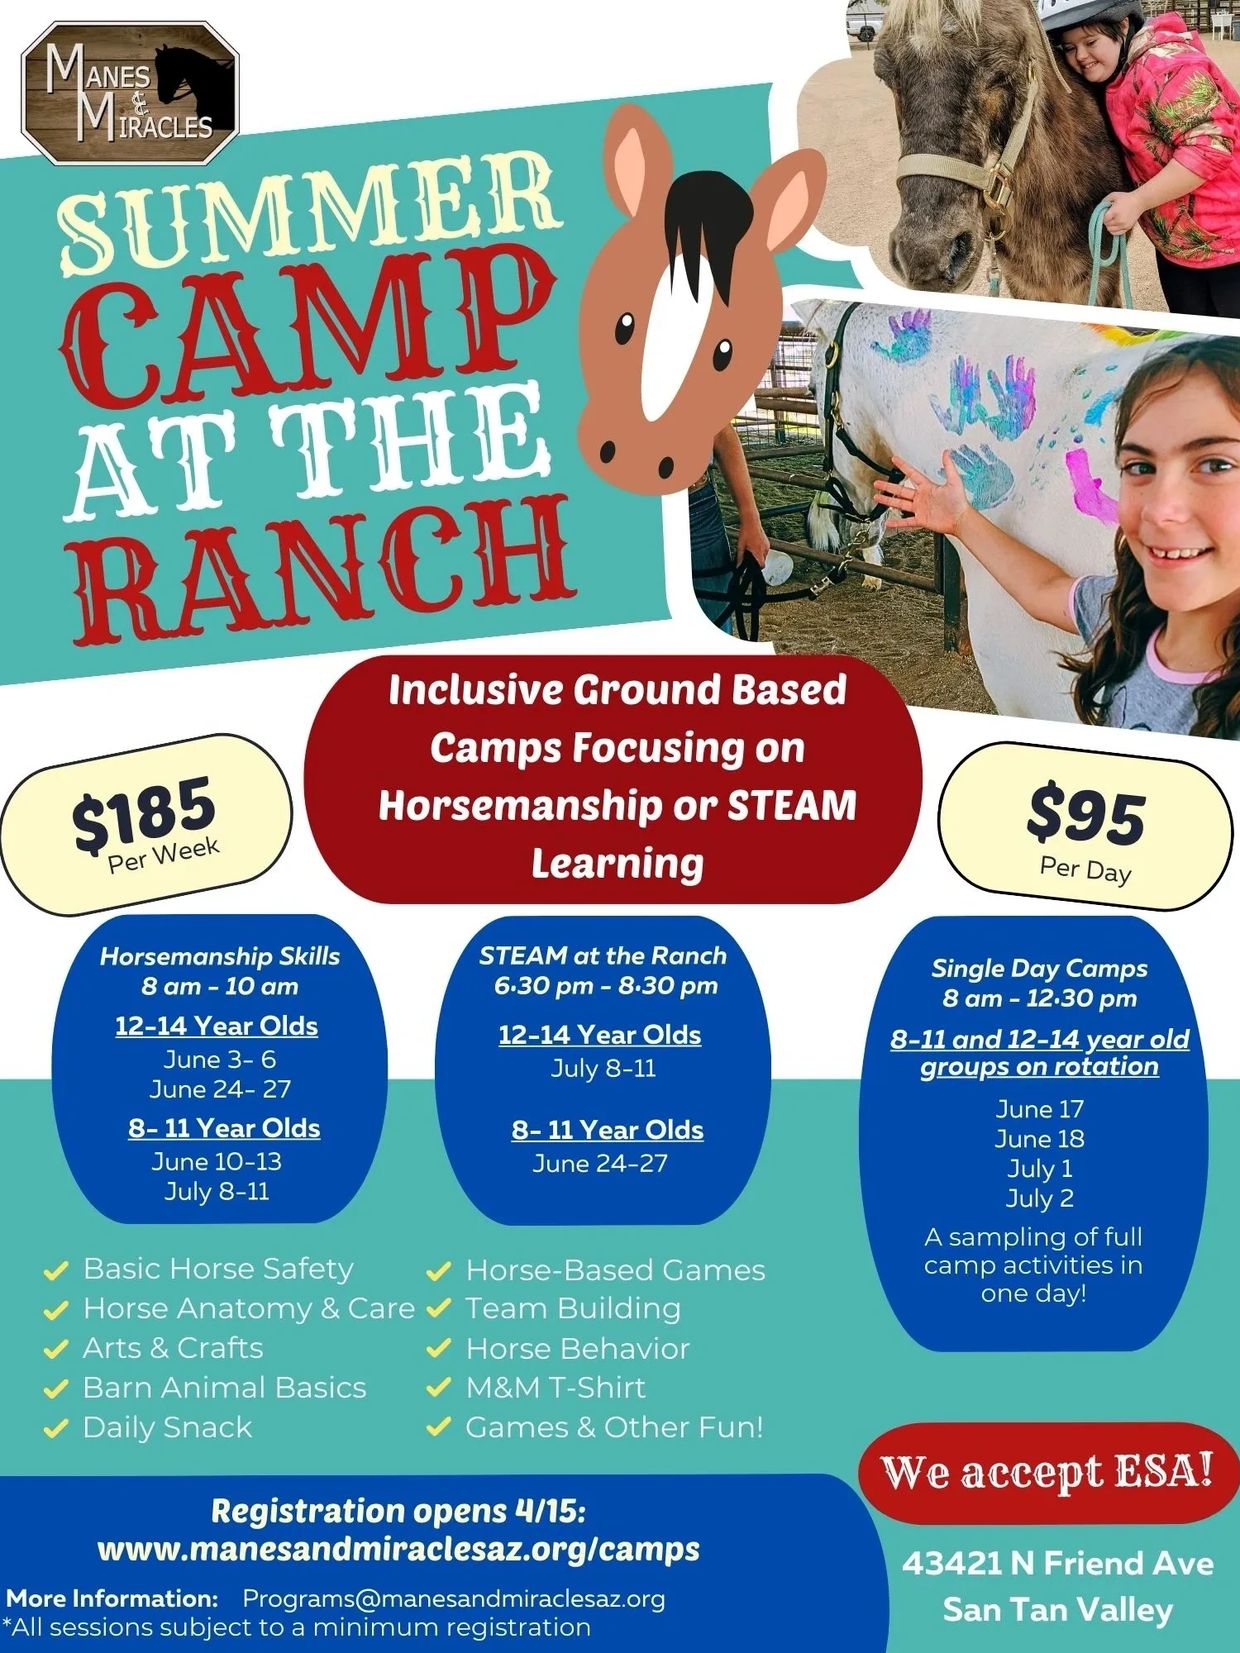 Flyer with information about Summer Camp at the Ranch including STEAM summer camp and horsemanship 